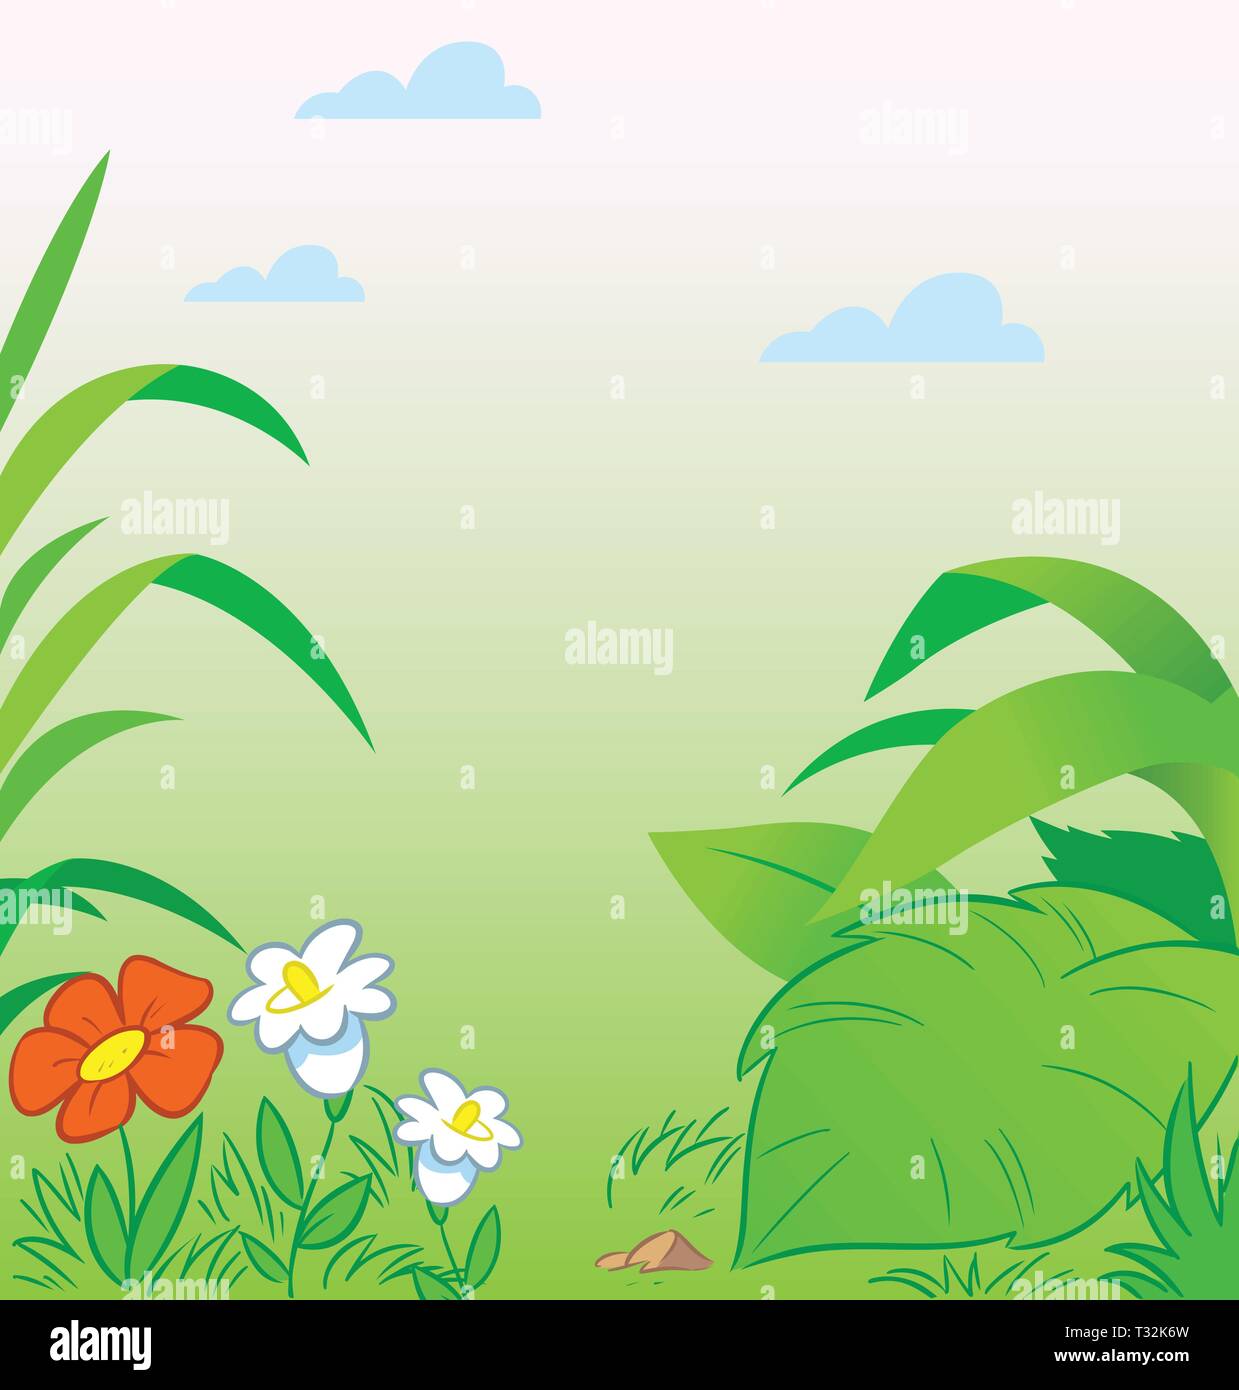 Green background with leaves and flowers in a cartoon style, on separate layers. Stock Vector